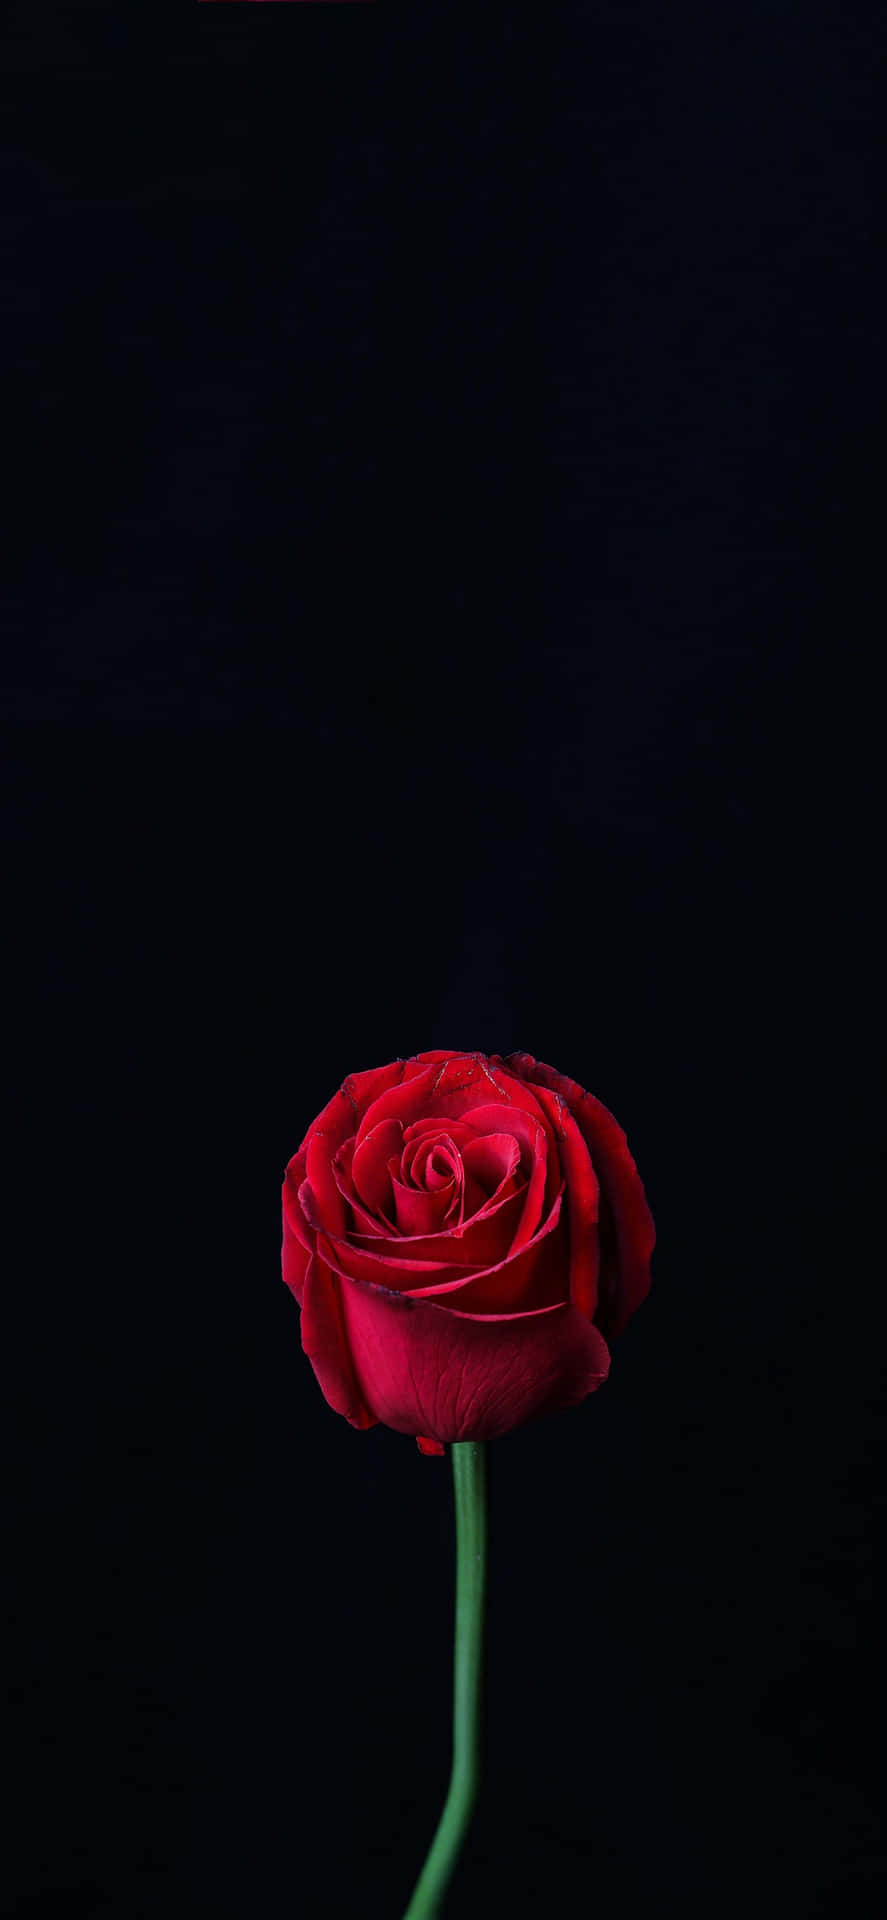 A Red Rose In A Vase Wallpaper